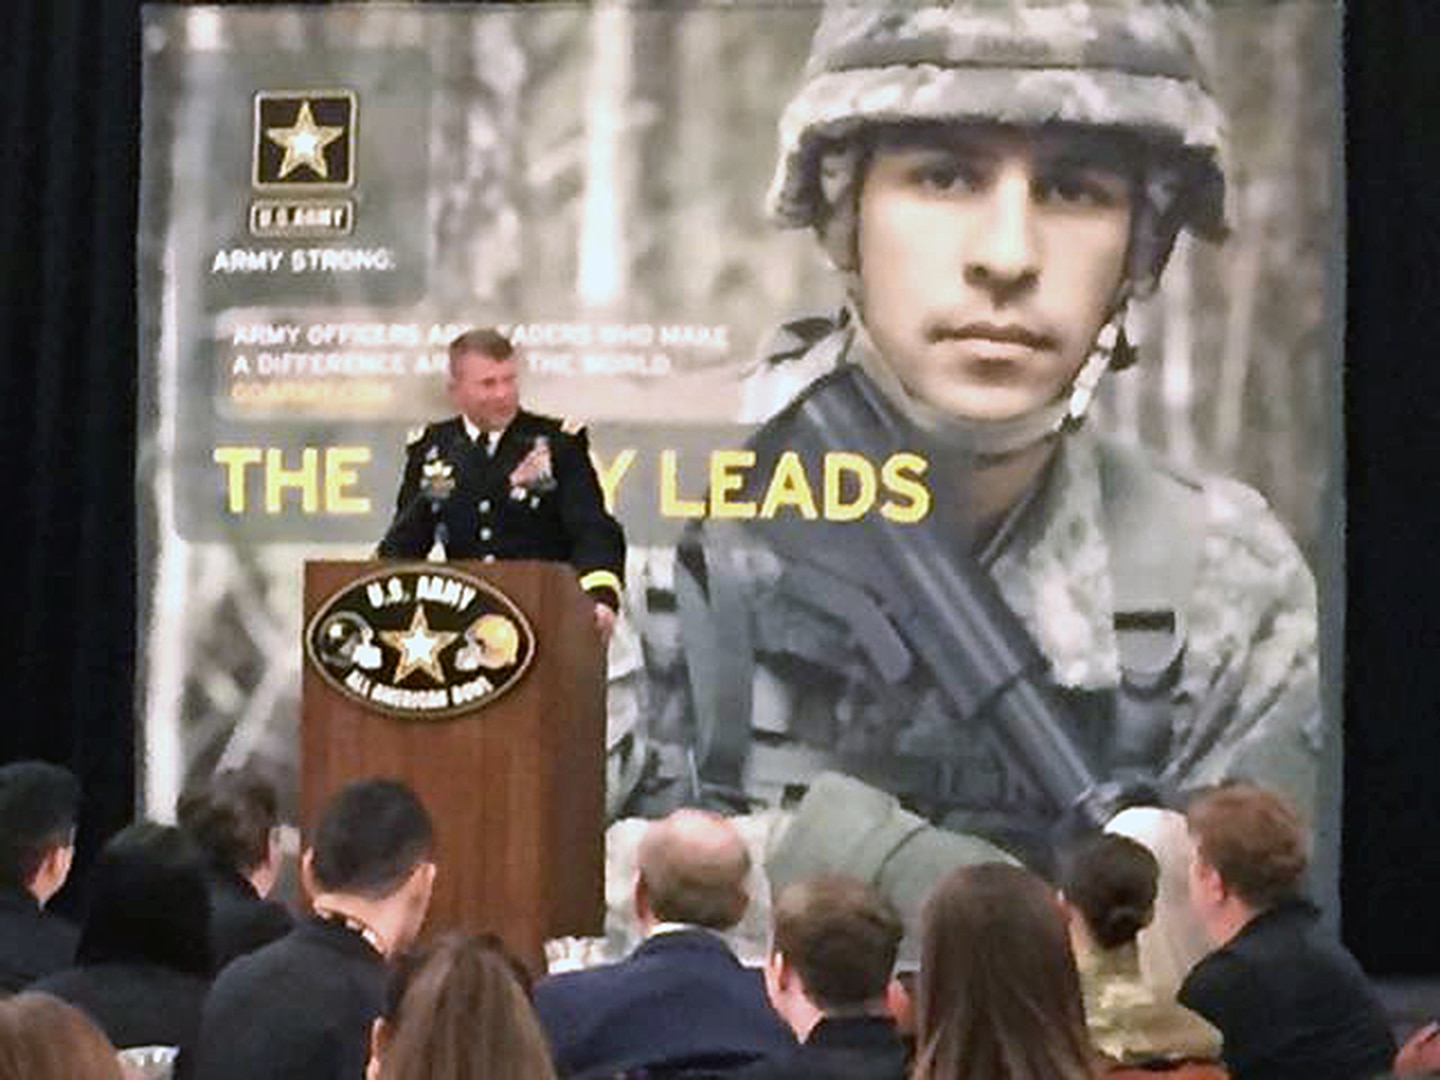 Lt. Gen. Jeffrey S. Buchanan, U.S. Army North commanding general at Joint Base San Antonio-Fort Sam Houston, spoke to high school musicians selected to play as part of the U.S. Army All-American Bowl Marching Band about leadership and selfless service during the band welcome dinner Jan. 2, which celebrated and recognized them for their dedication and leadership to their schools and communities. The musicians are spending the week rehearsing for the Jan. 7 game at the Alamodome in San Antonio, receiving instruction from college and high school band directors, as well as learning from Soldiers in the U.S. Army Field Band.